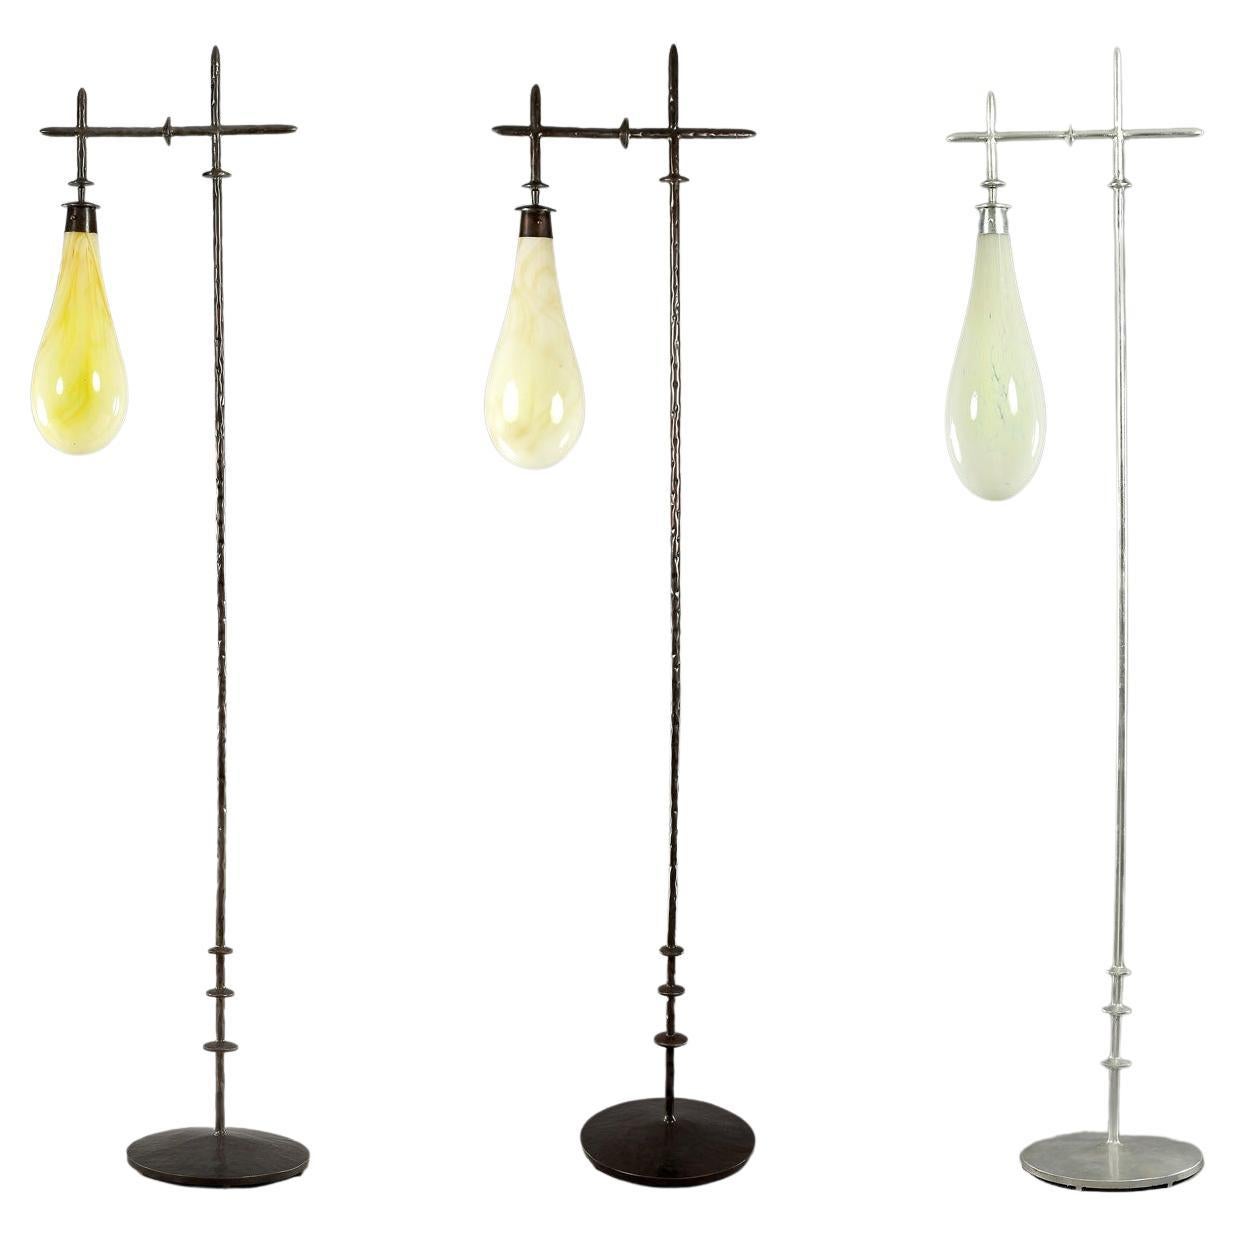 Unique floor lamp with over size hand blown glass shade